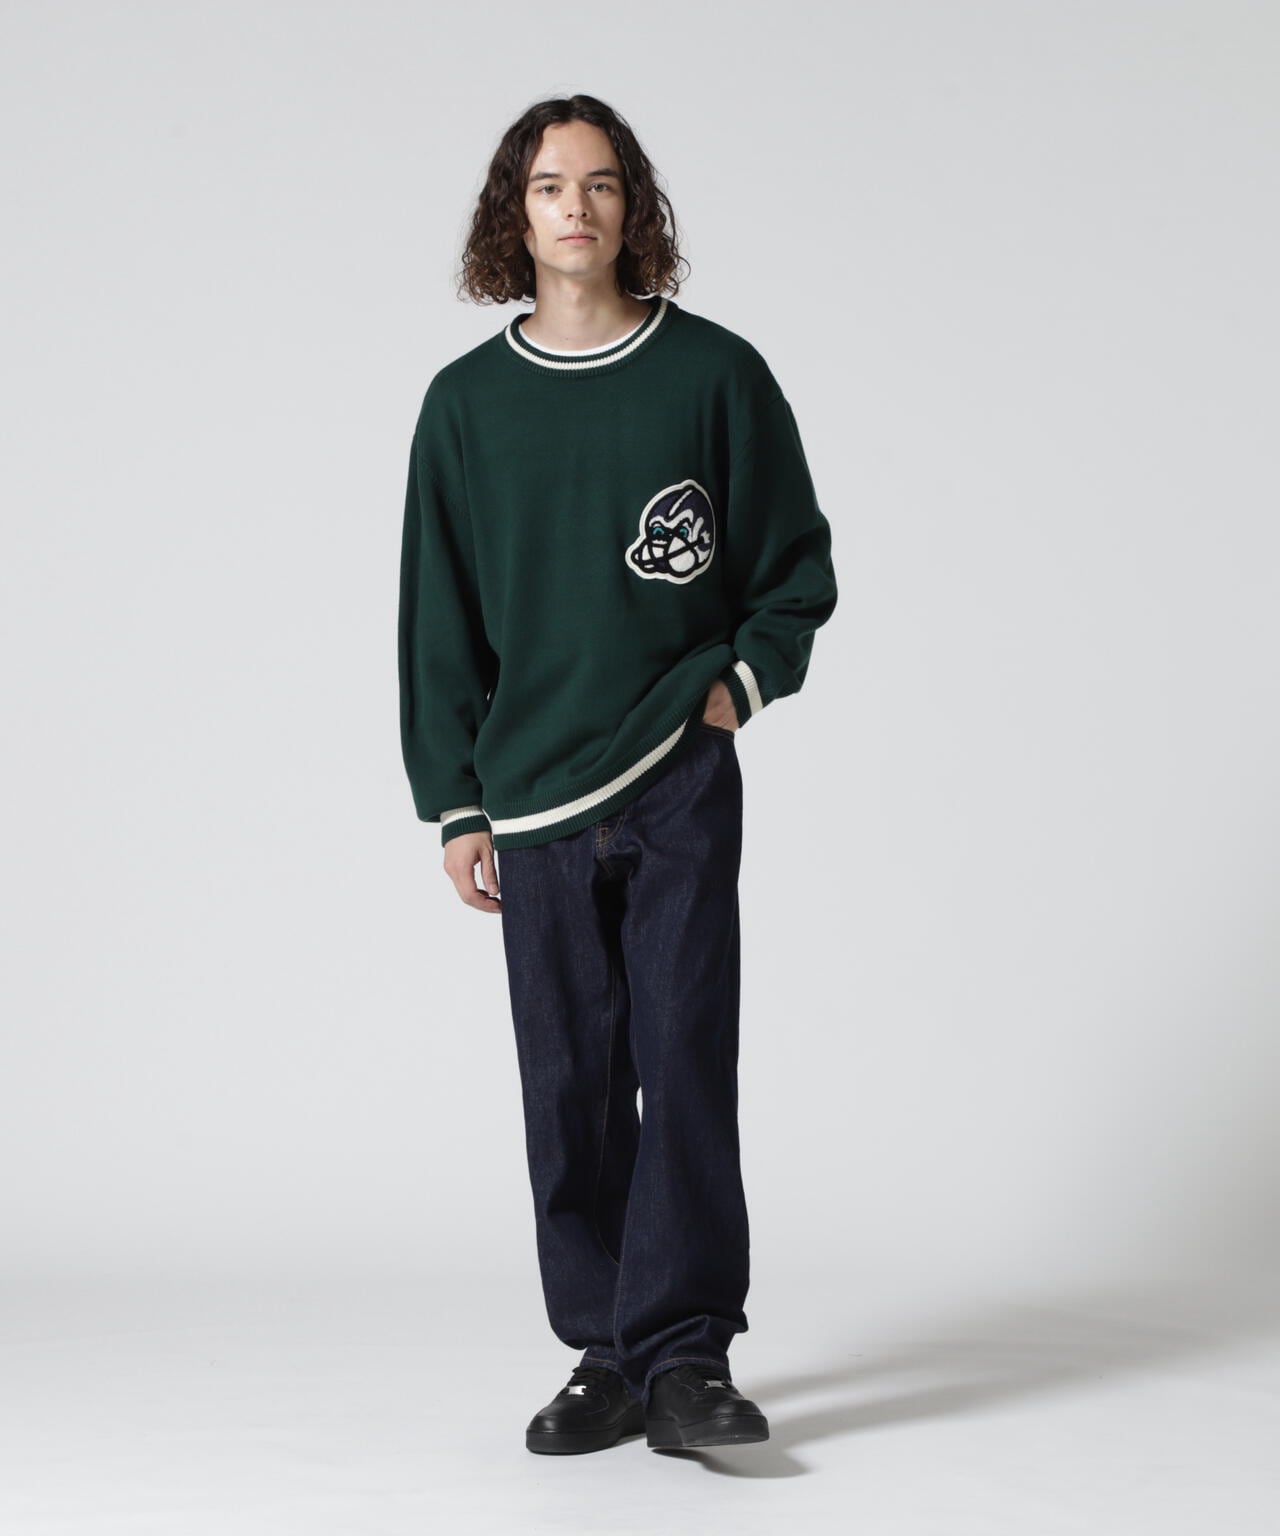 LETTERED CHENILLE PATCH CREW NECK SWEATER / レタード シェニール パッチ クルーネック セーター